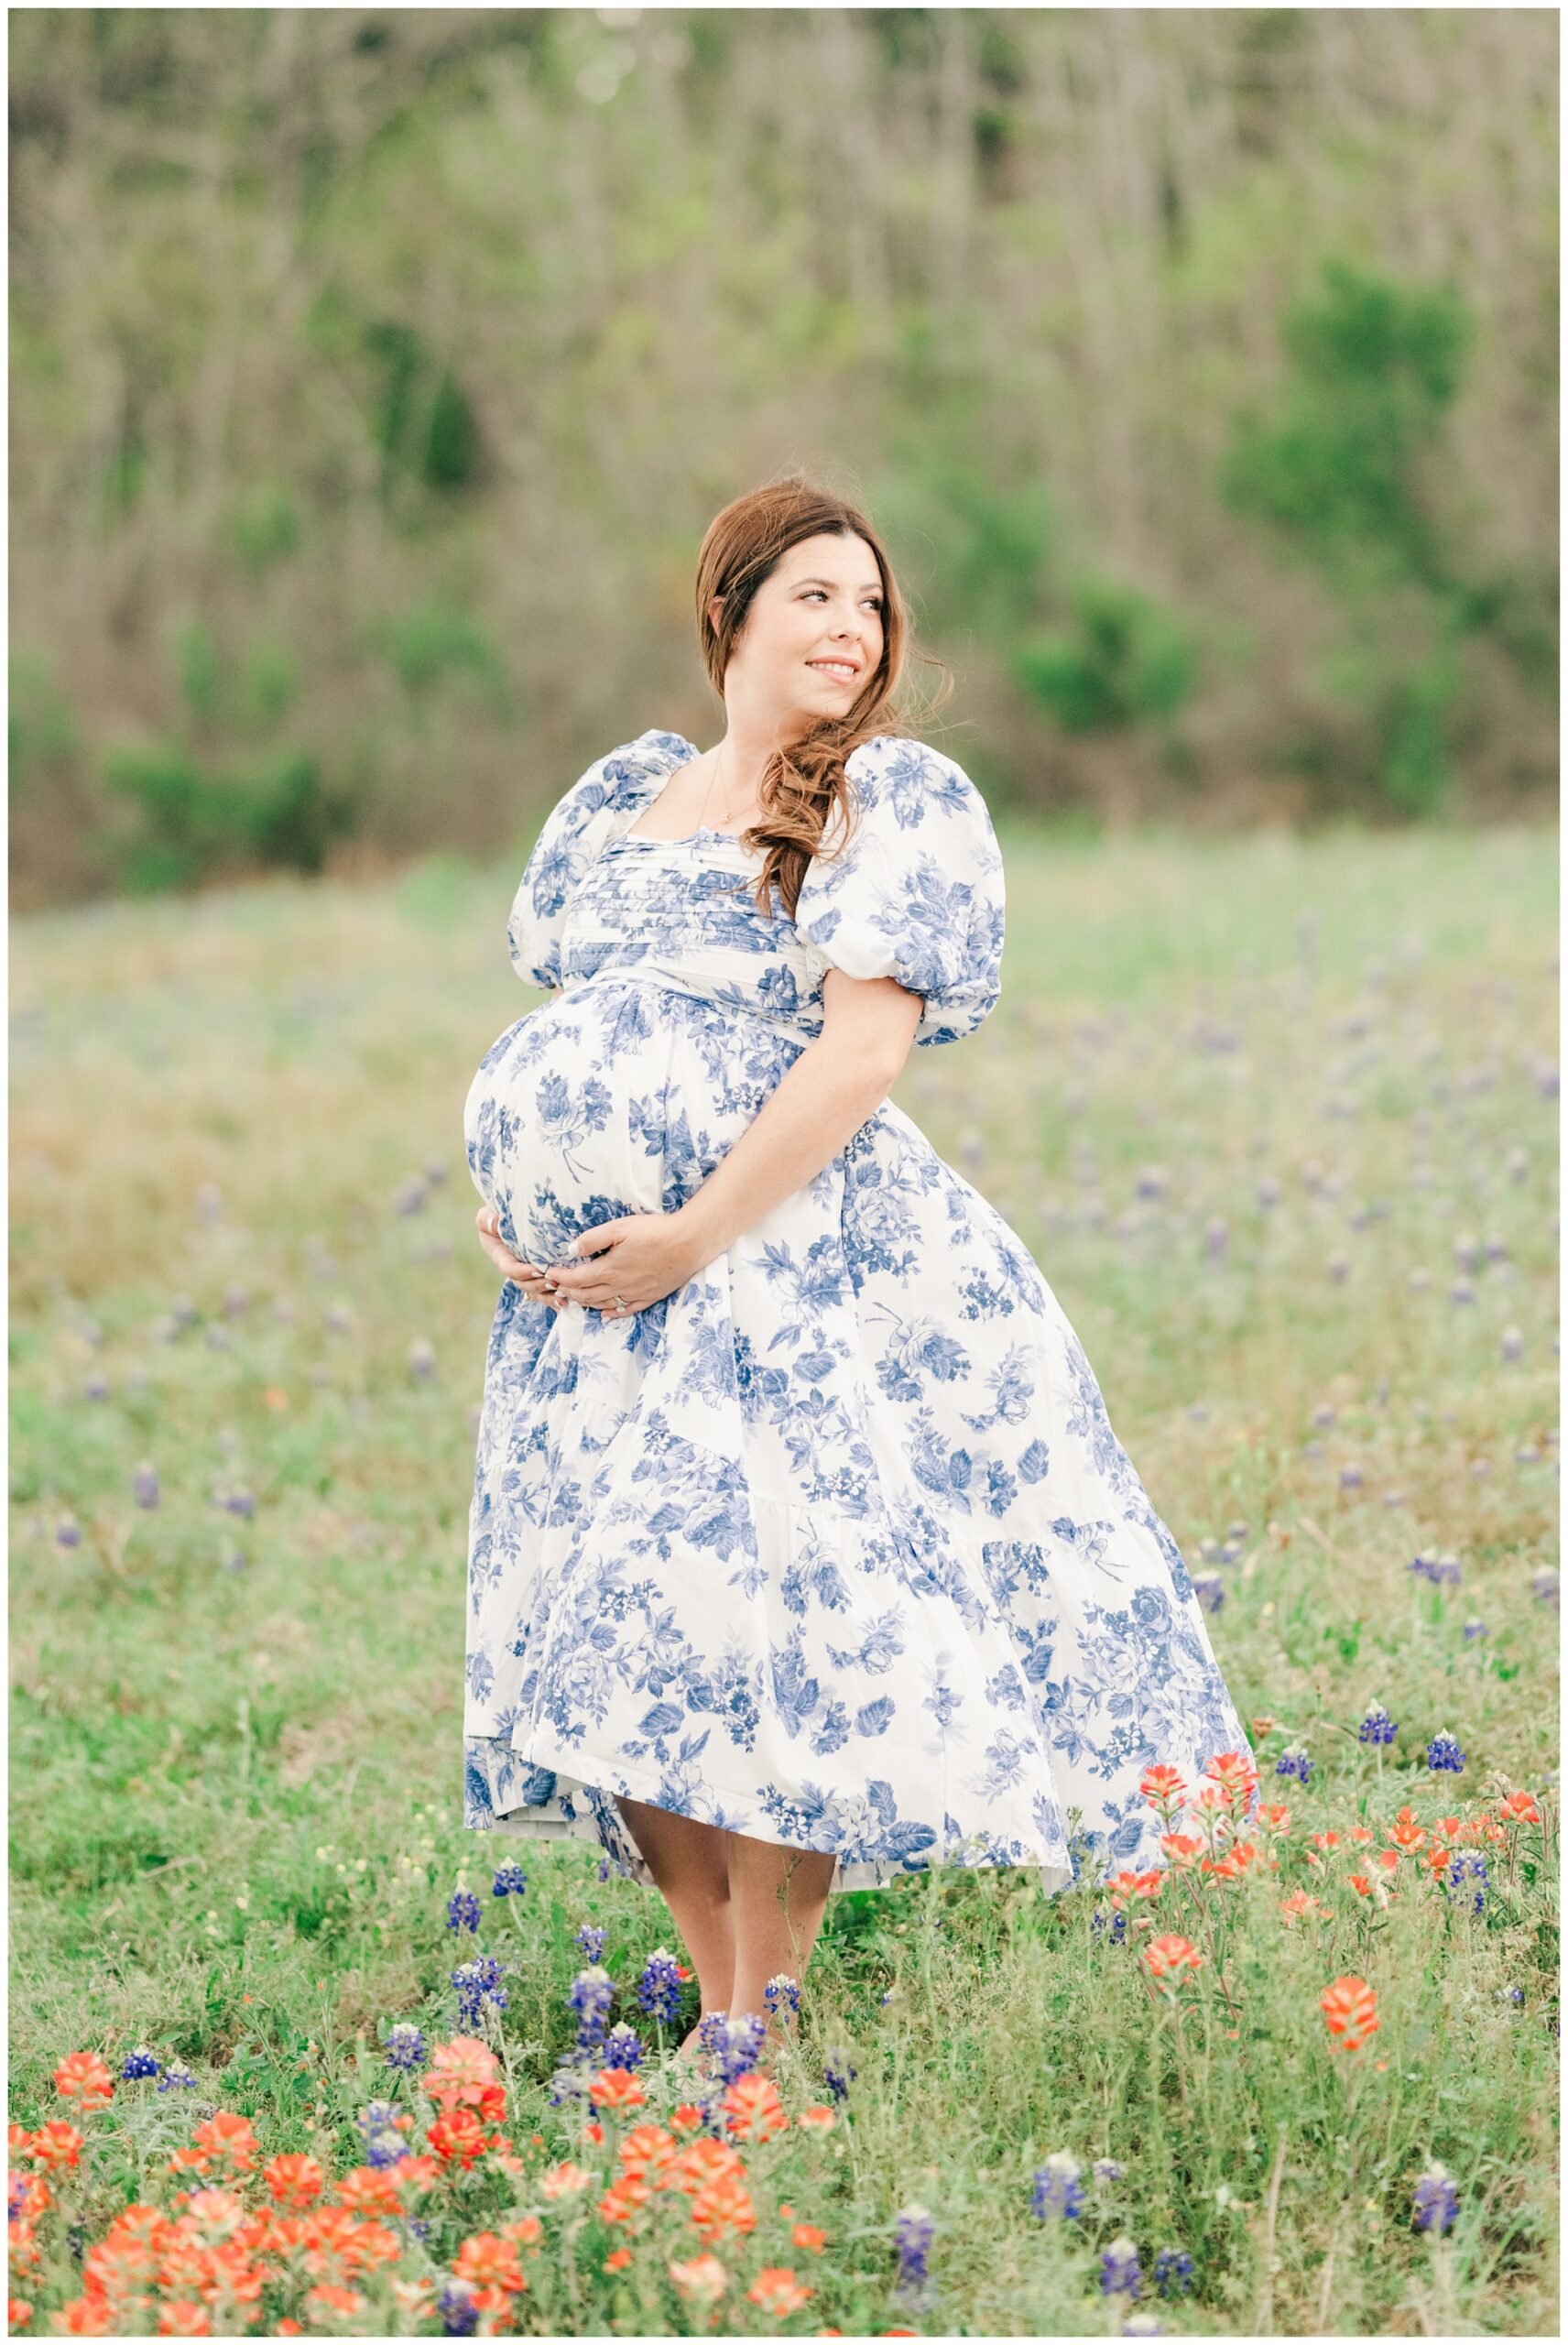 Maternity photography in a patch of wildflowers, Spring Texas.